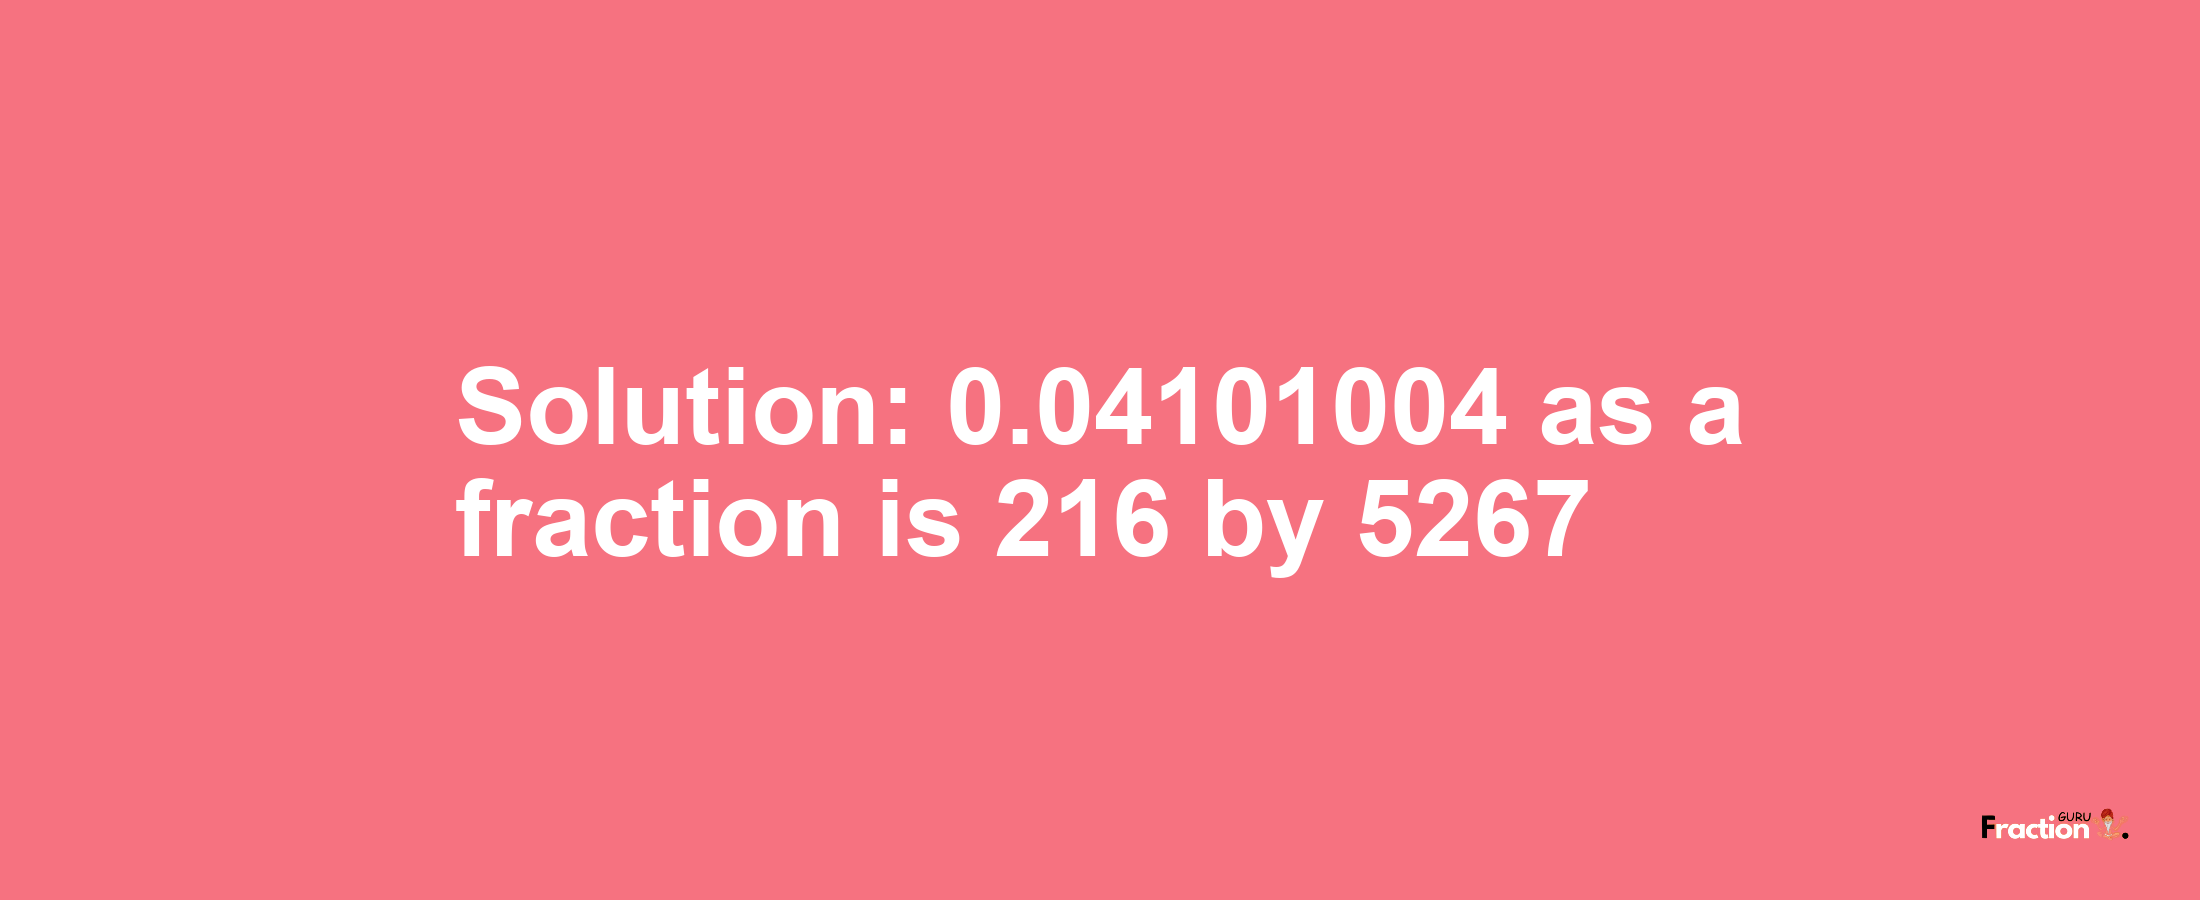 Solution:0.04101004 as a fraction is 216/5267